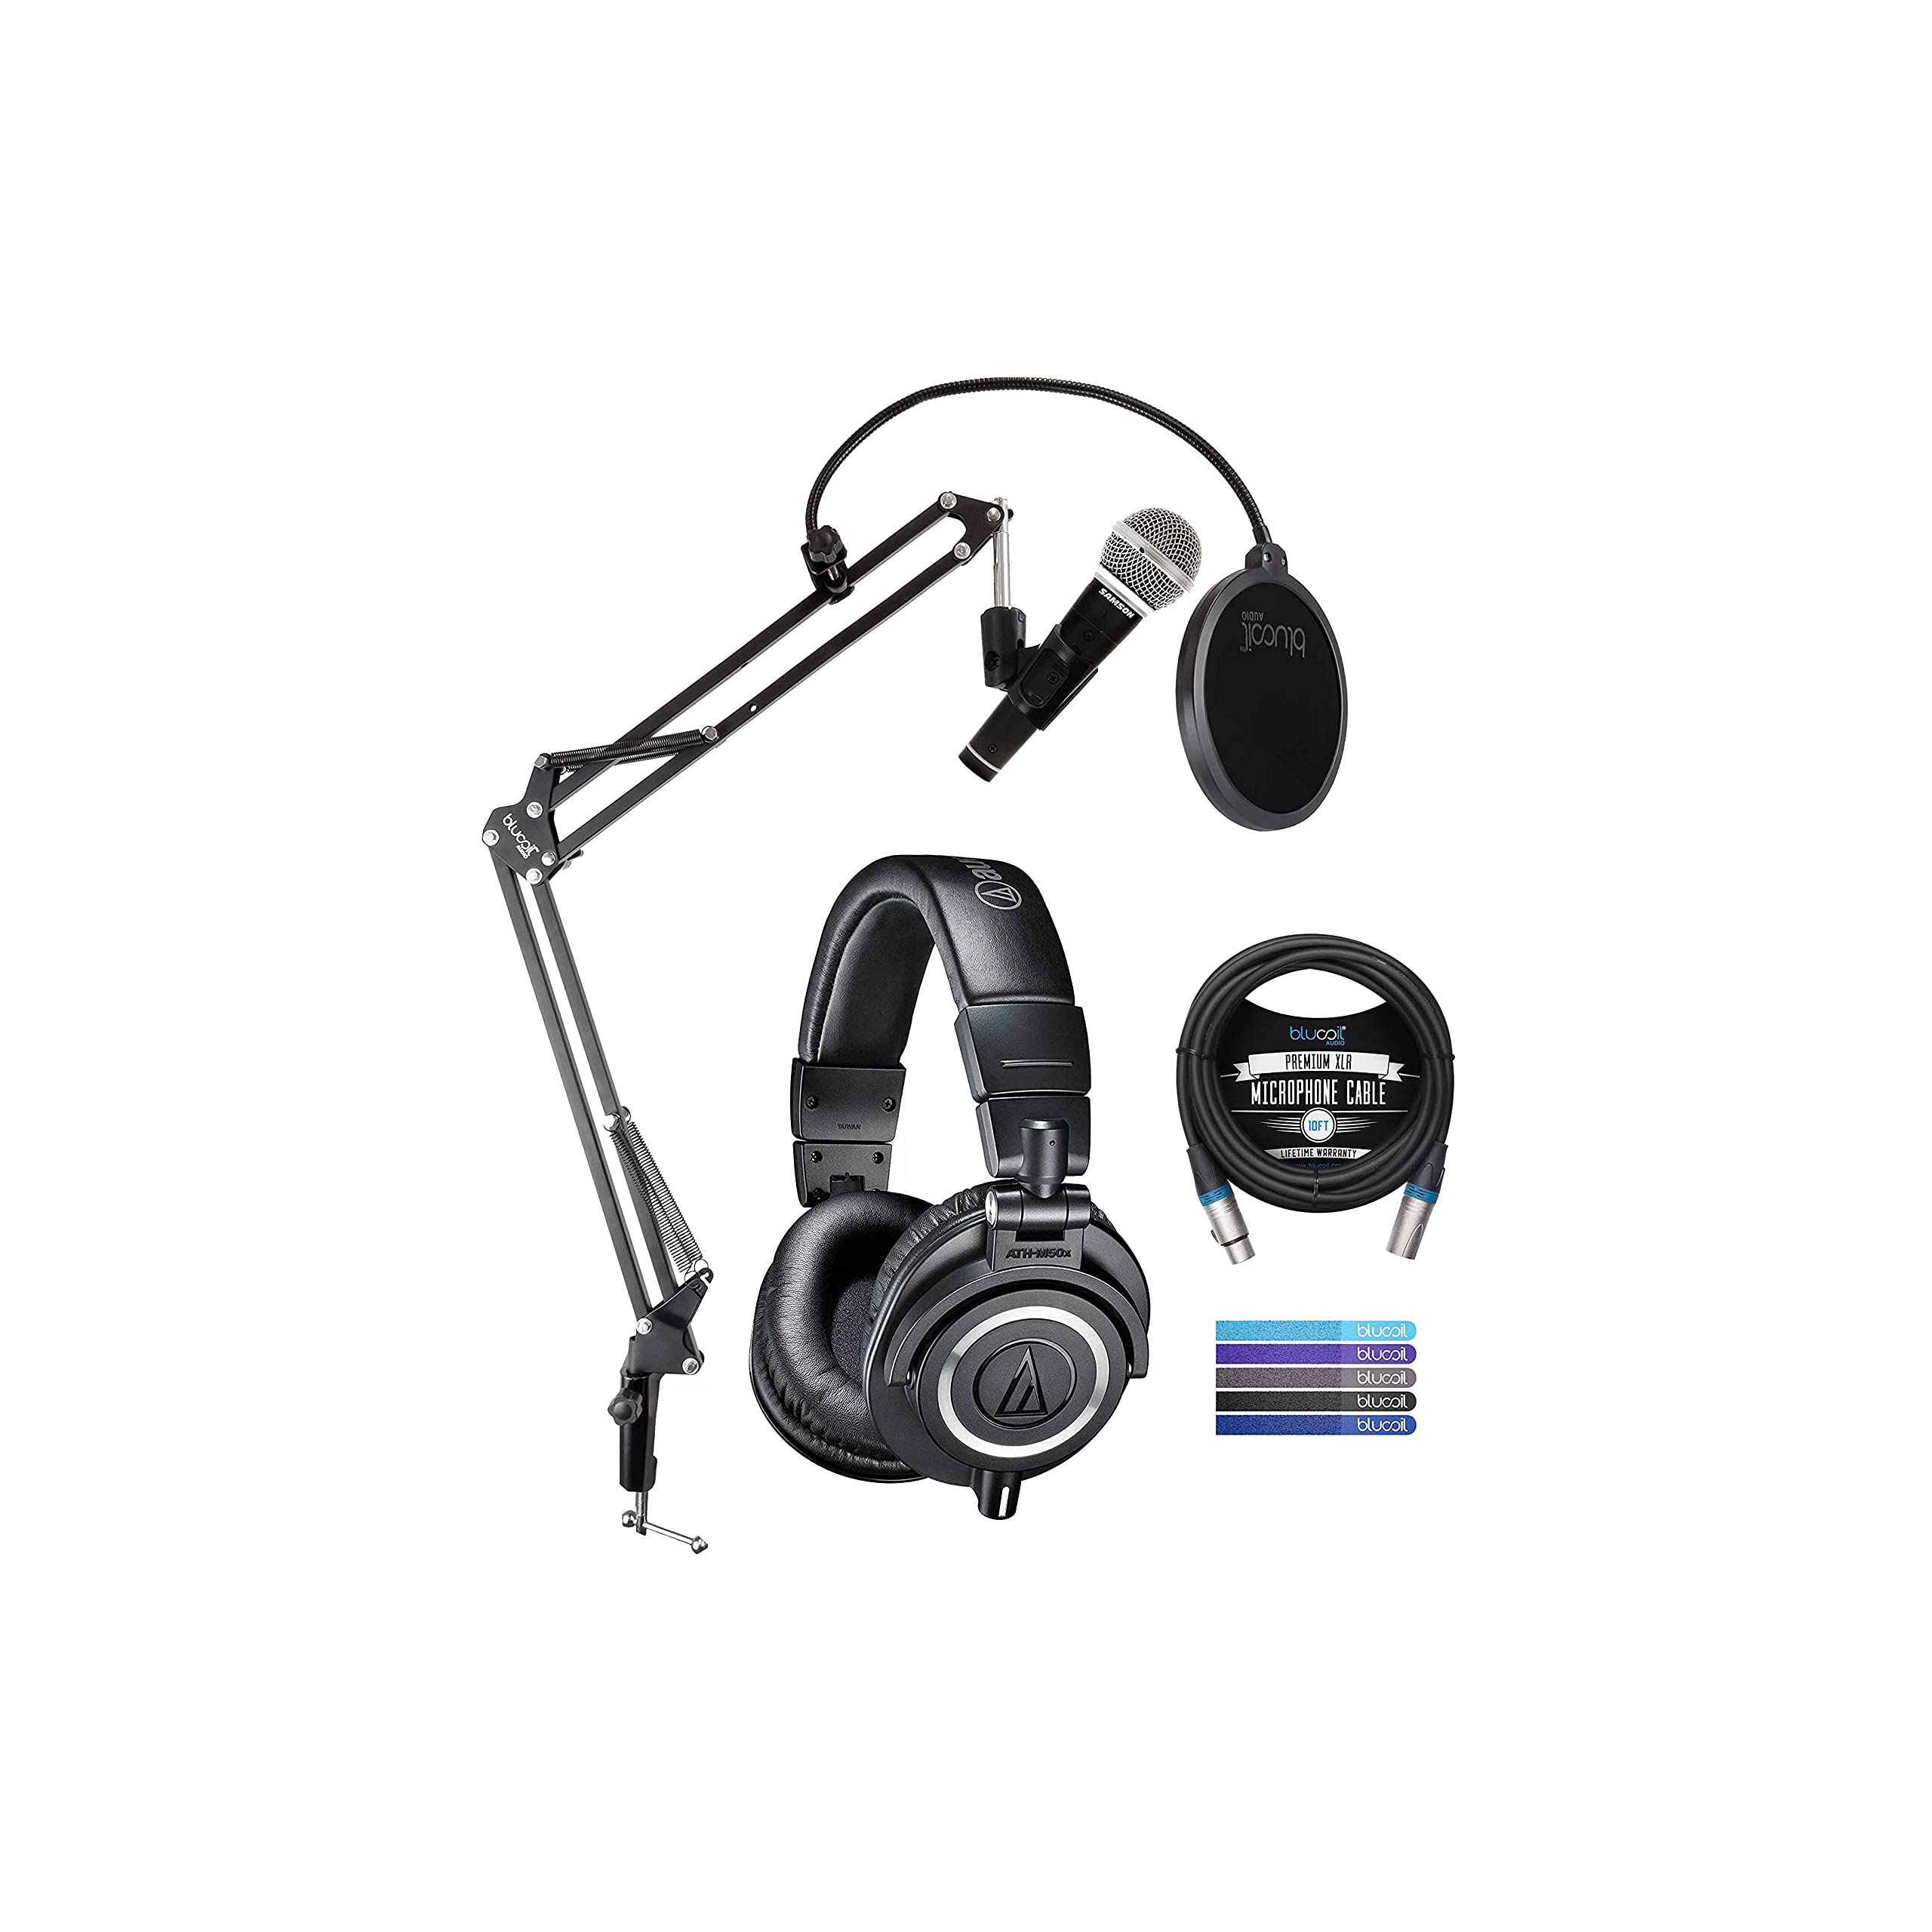 Mua Audio Technica ATH-M50X Professional Studio Monitor Headphones, Black  Bundle with Samson R21S Dynamic Microphone, Blucoil Boom Arm Plus Pop  Filter, 10' XLR Cable, and 5-Pack of Reusable Cable Ties trên Amazon